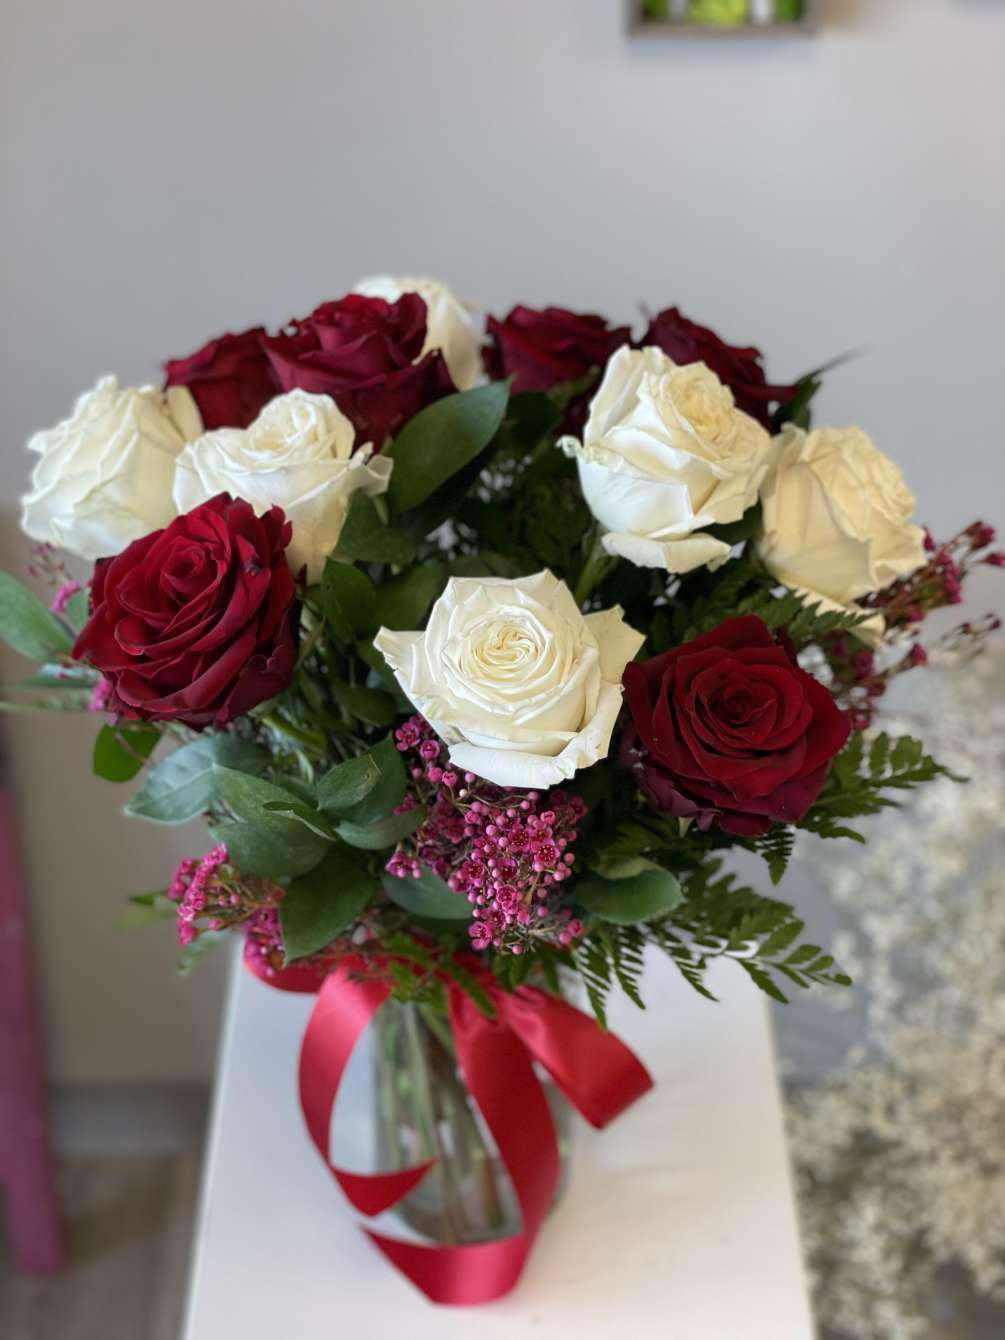 Dozen roses in a vase. Red and white. Let us know if